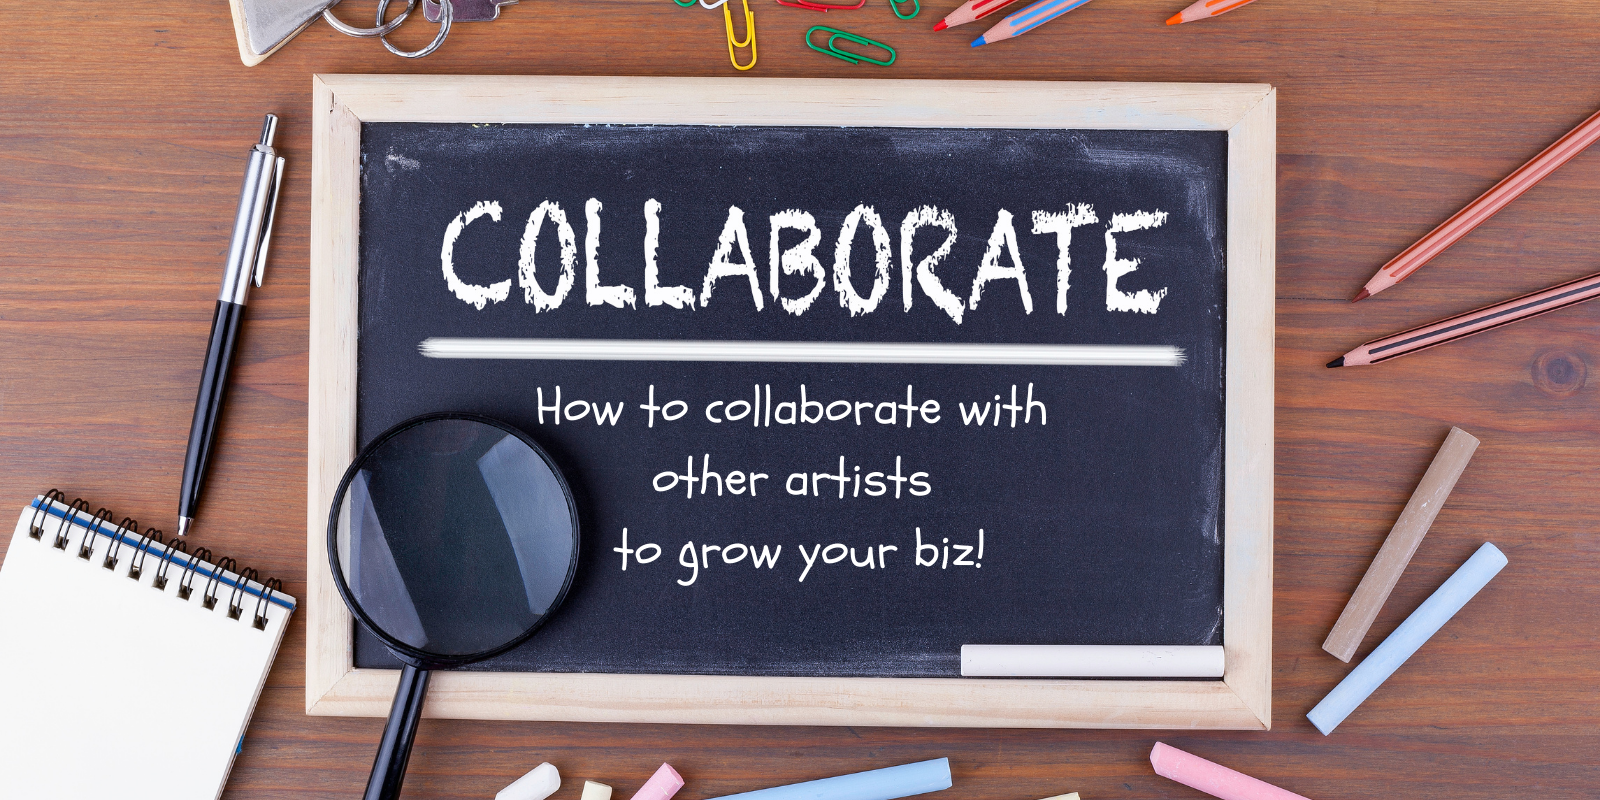 Grow your art business through collaborations